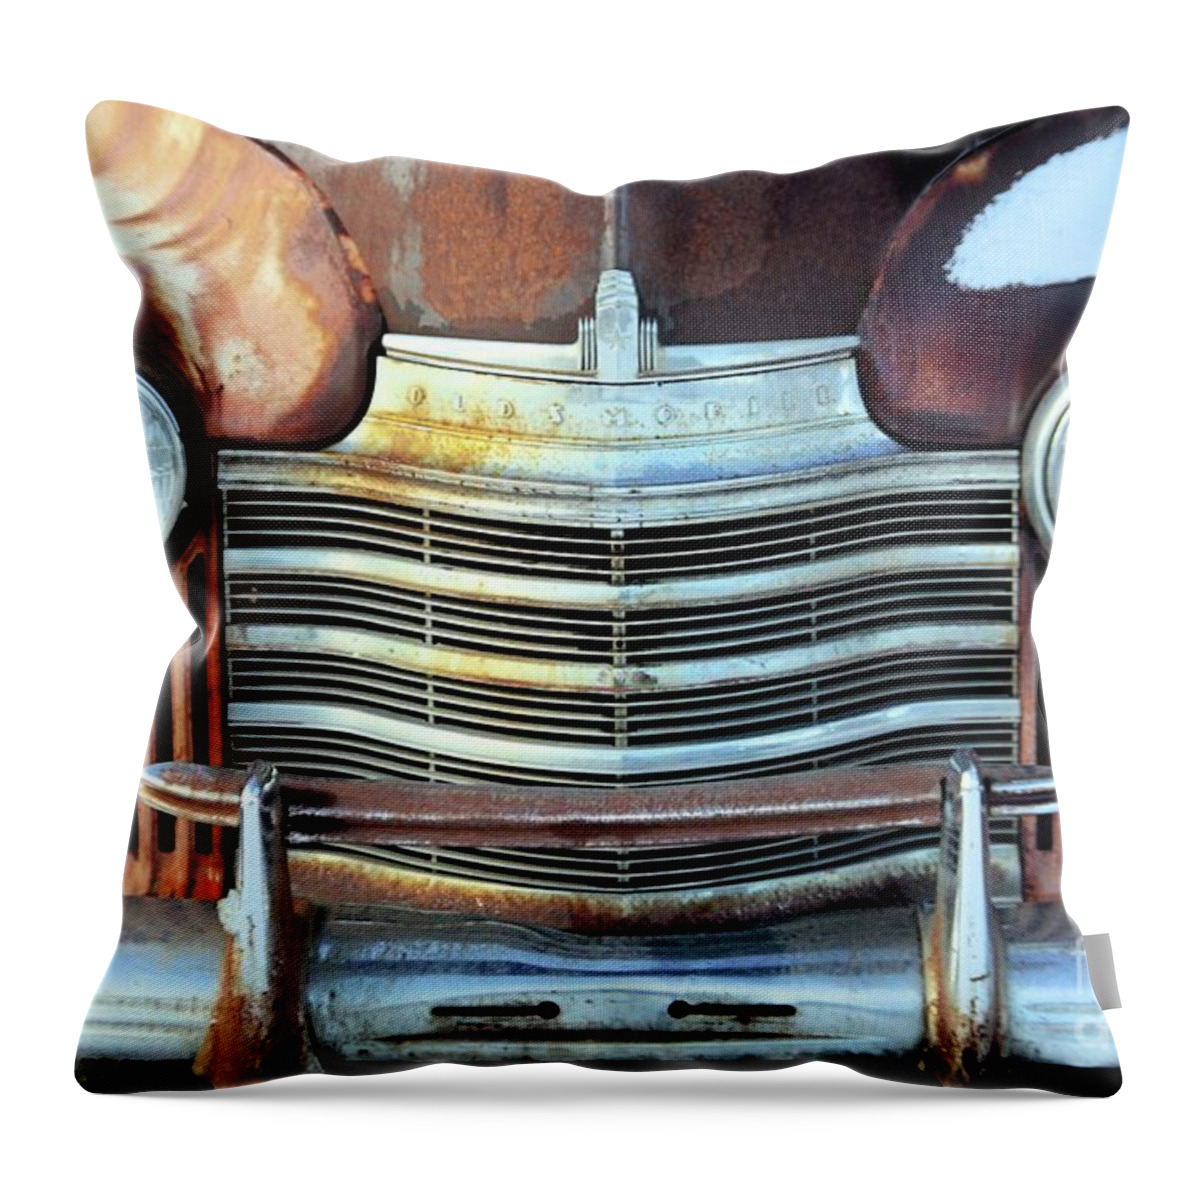 Oldsmobile Throw Pillow featuring the photograph Oldsmobile by Roland Stanke